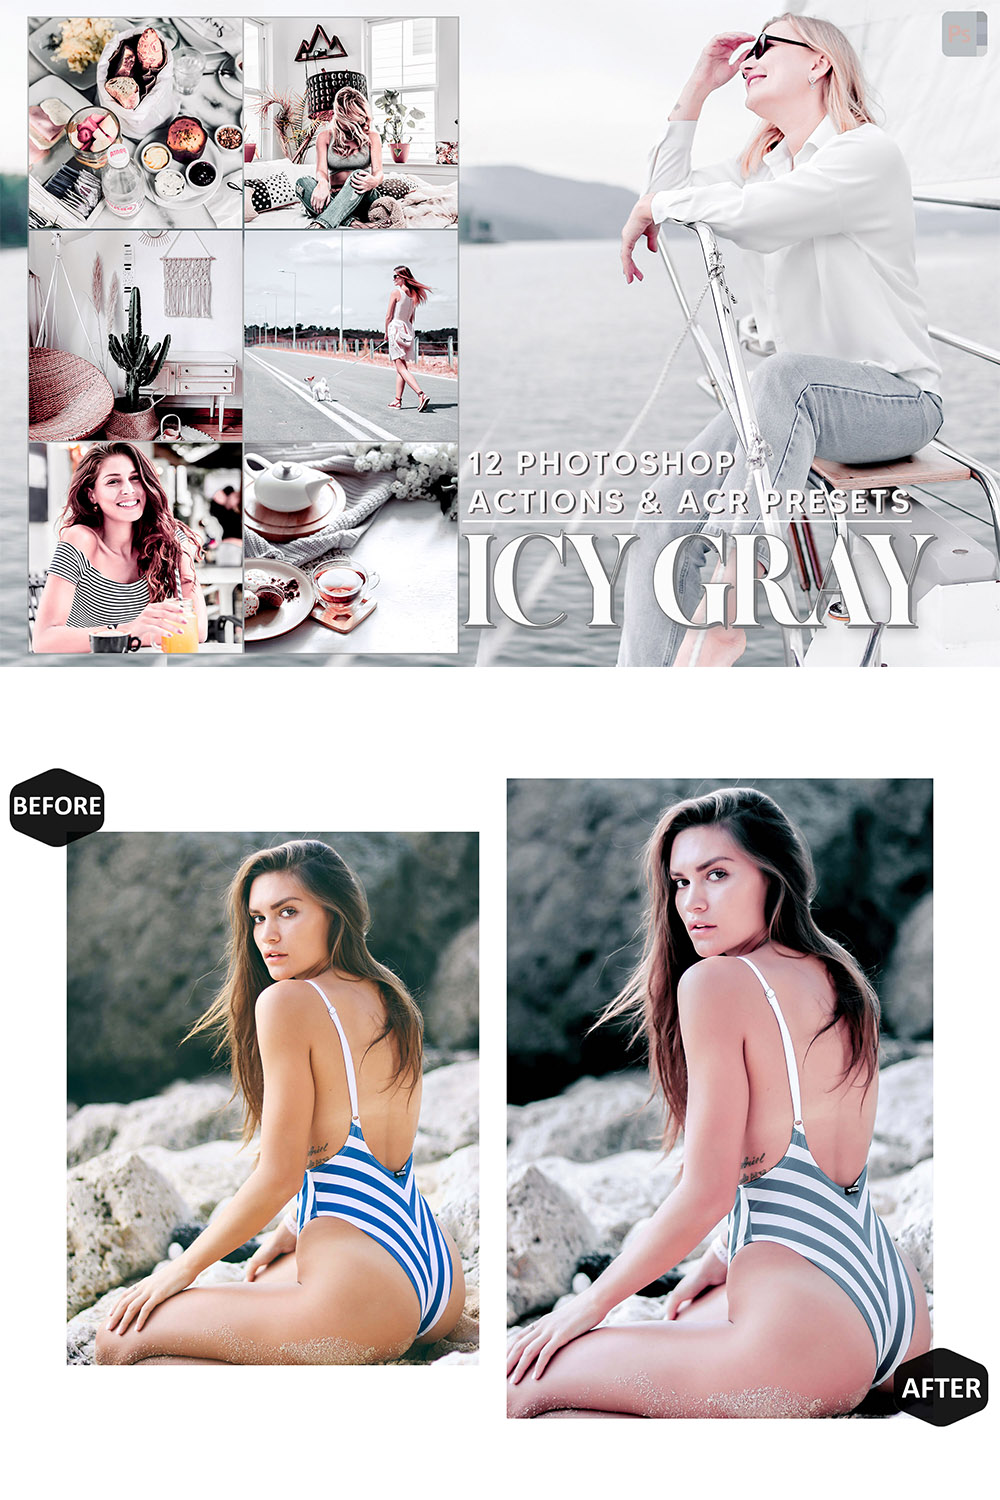 12 Photoshop Actions, Icy Gray Ps Action, Silver ACR Preset, Bright Grey Ps Filter, Atn Portrait And Lifestyle Theme For Instagram, Blogger pinterest preview image.